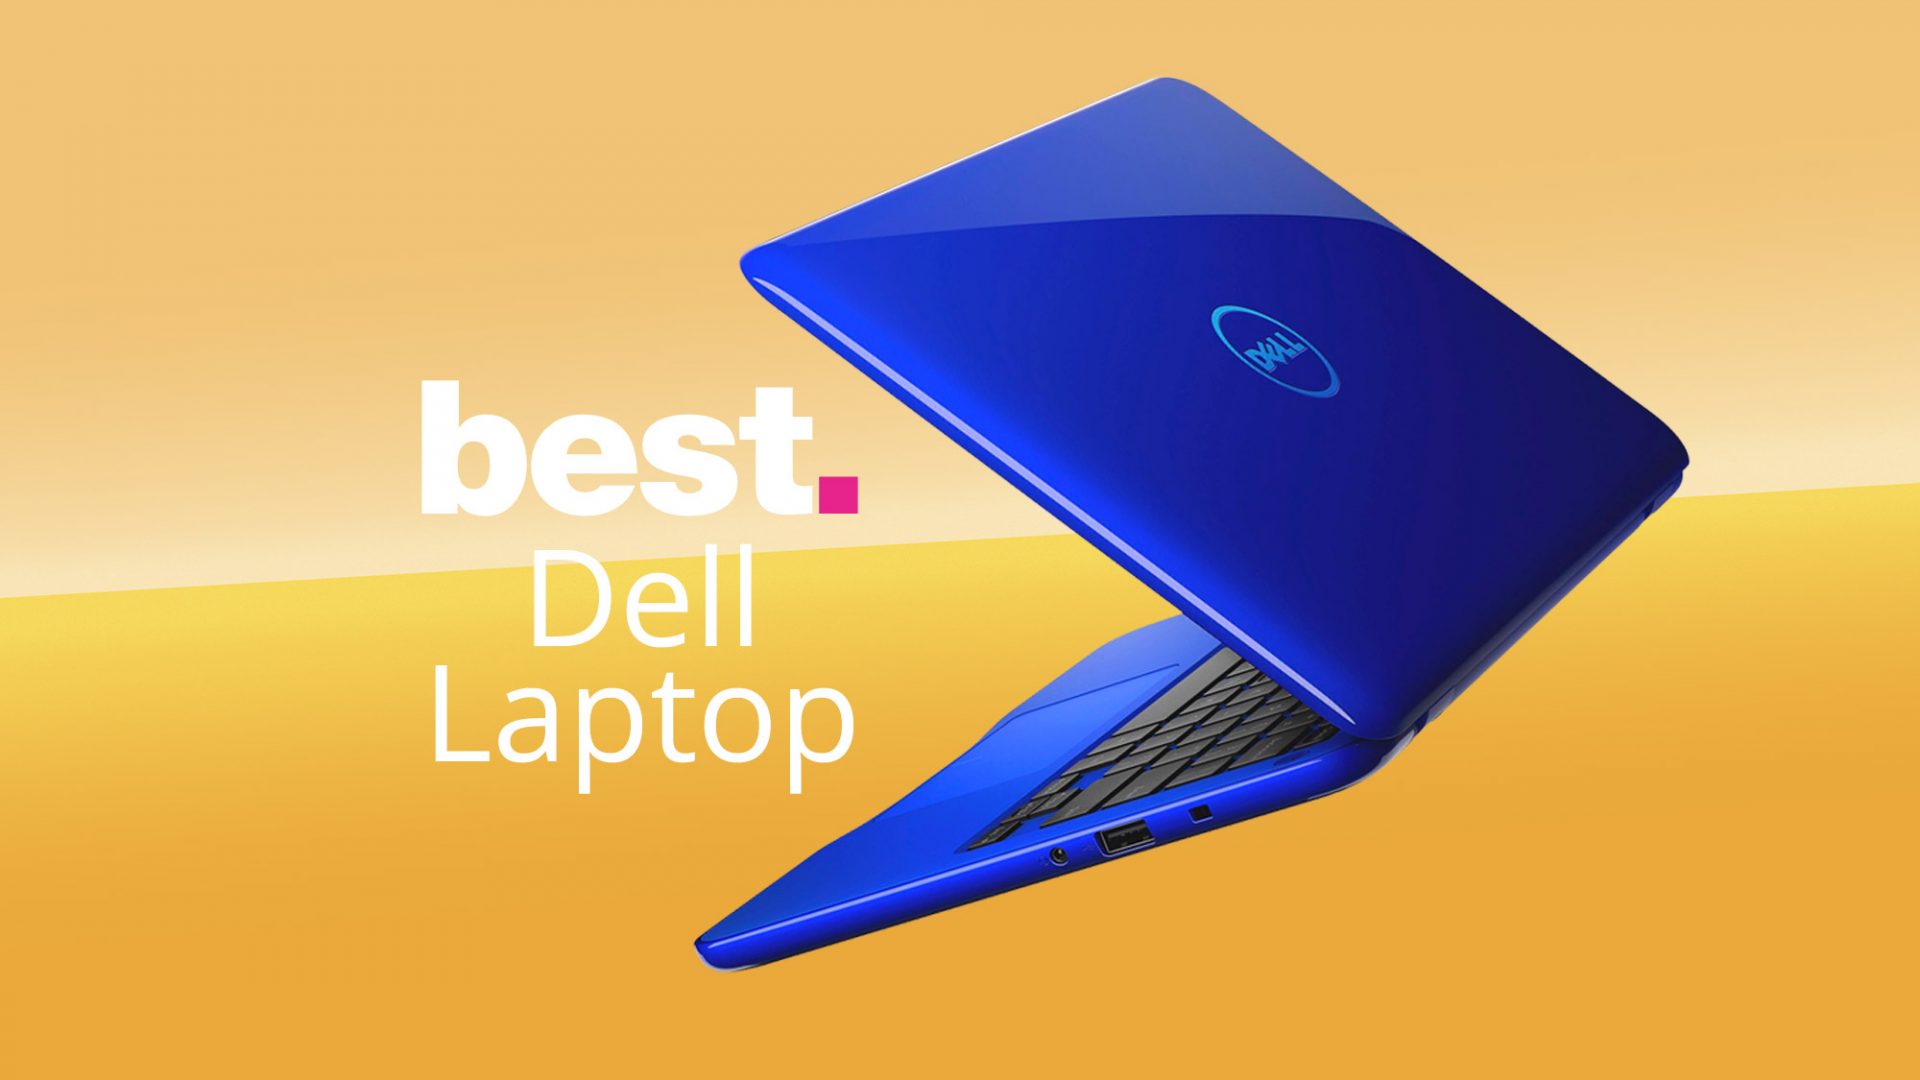 The suitable Dell laptops 2020